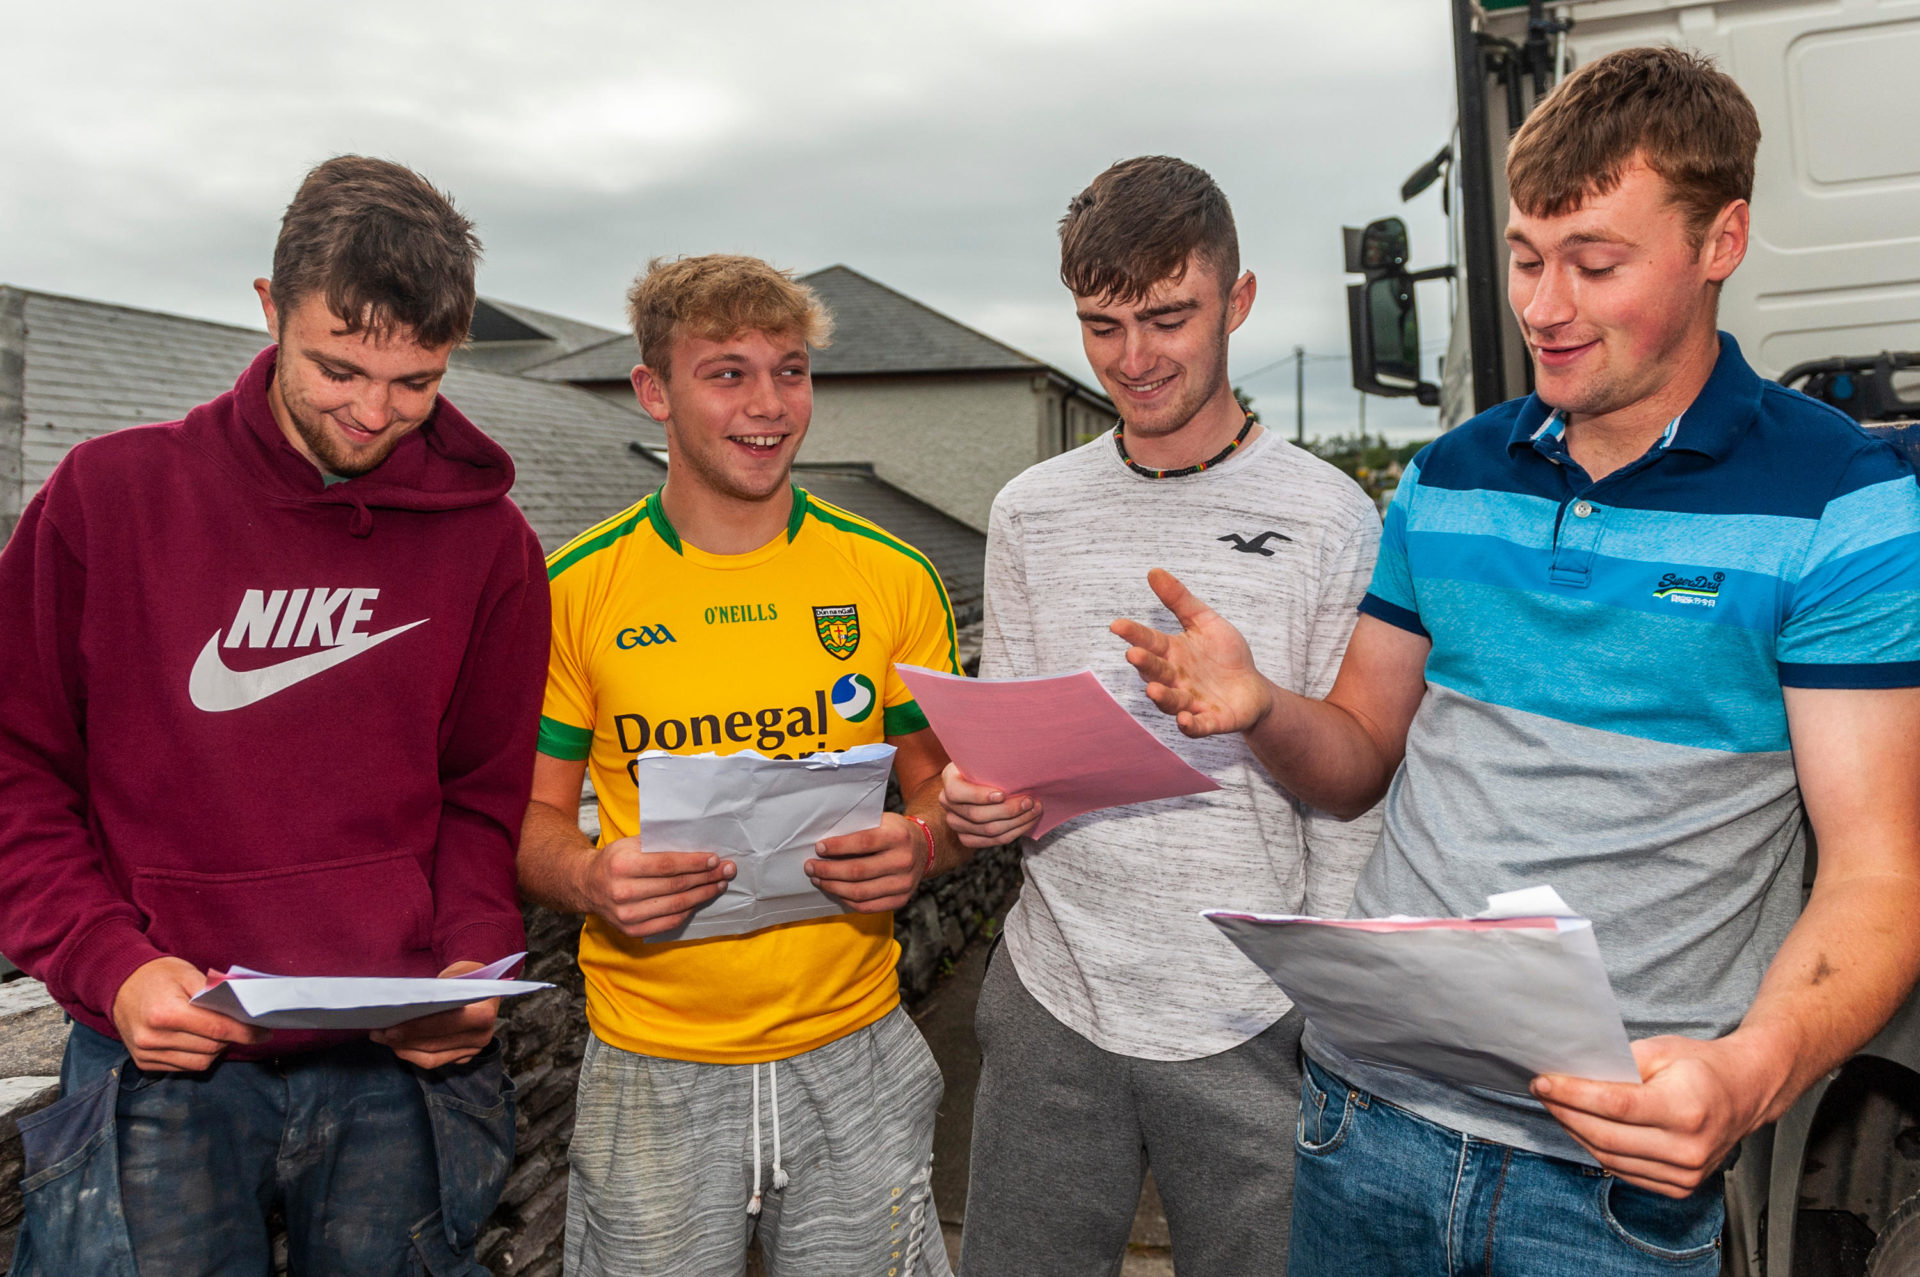 Students Andrew O'Connor, Jamie O'Driscoll, Aidan McCarthy, and Kieran O'Driscoll receiving their Leaving Cert results at Schull Community College in Cork in 2019.